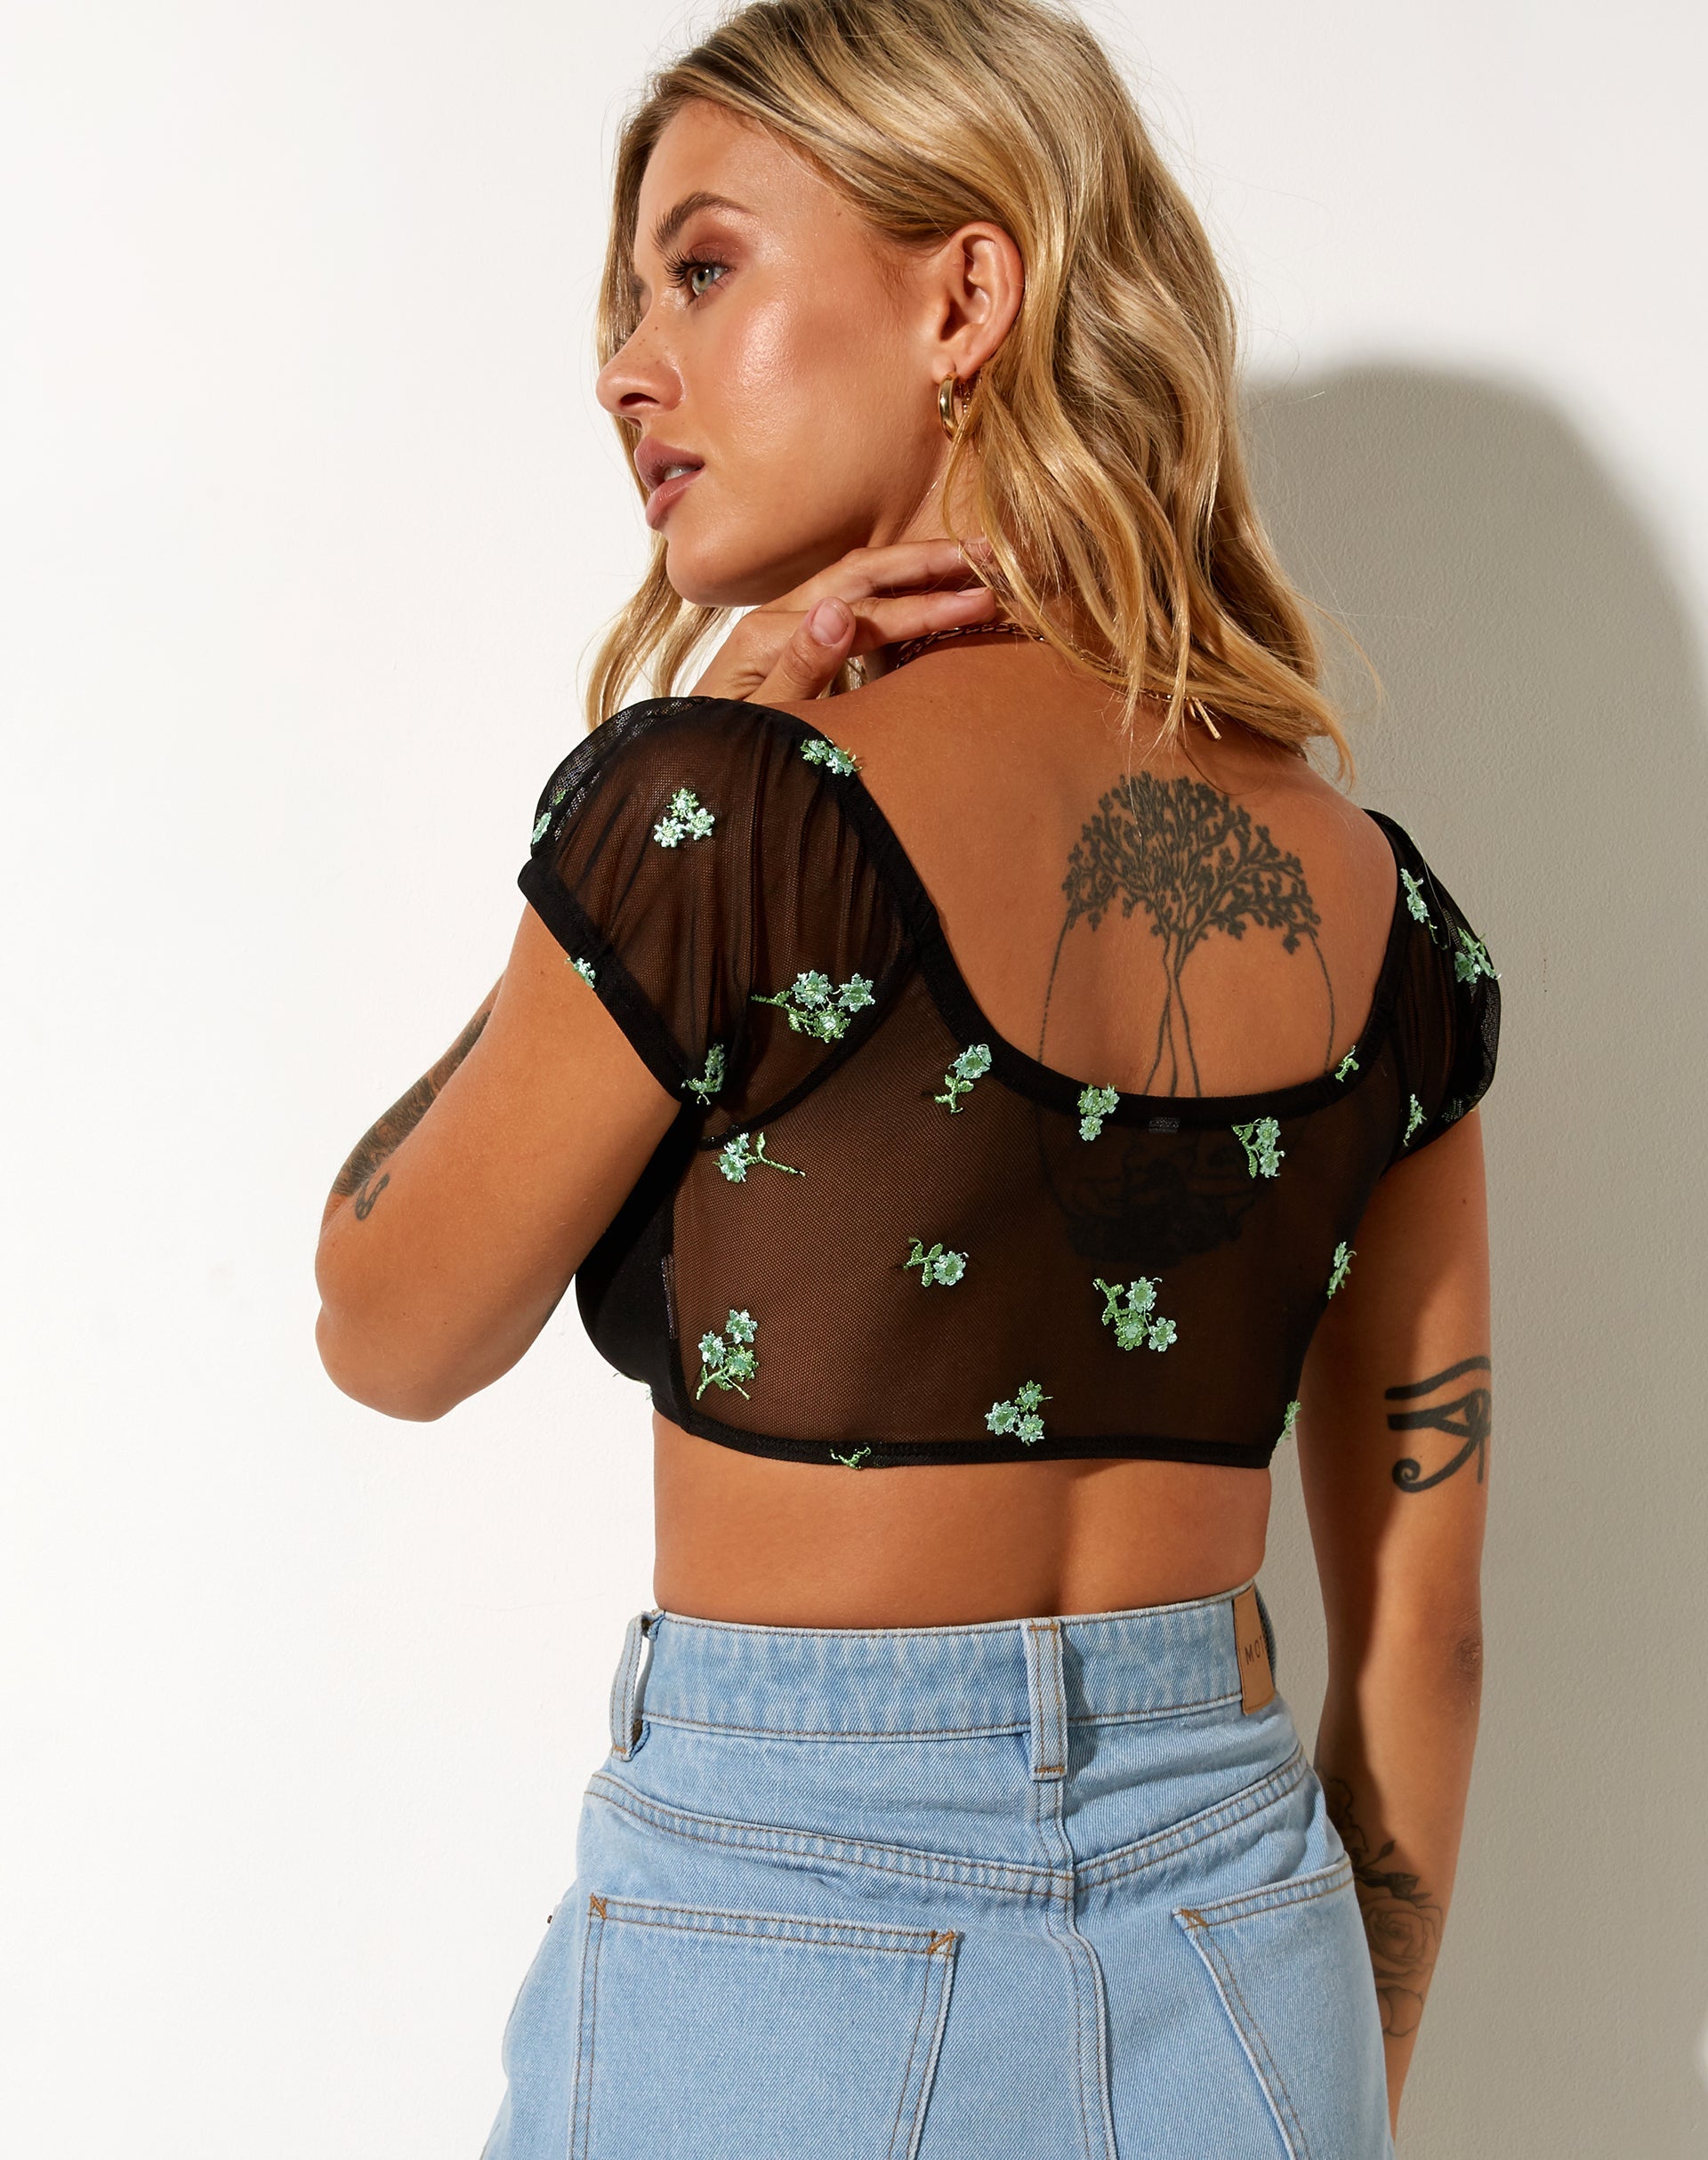 Image of Zule Crop Top in Black Daisy Lime Embro